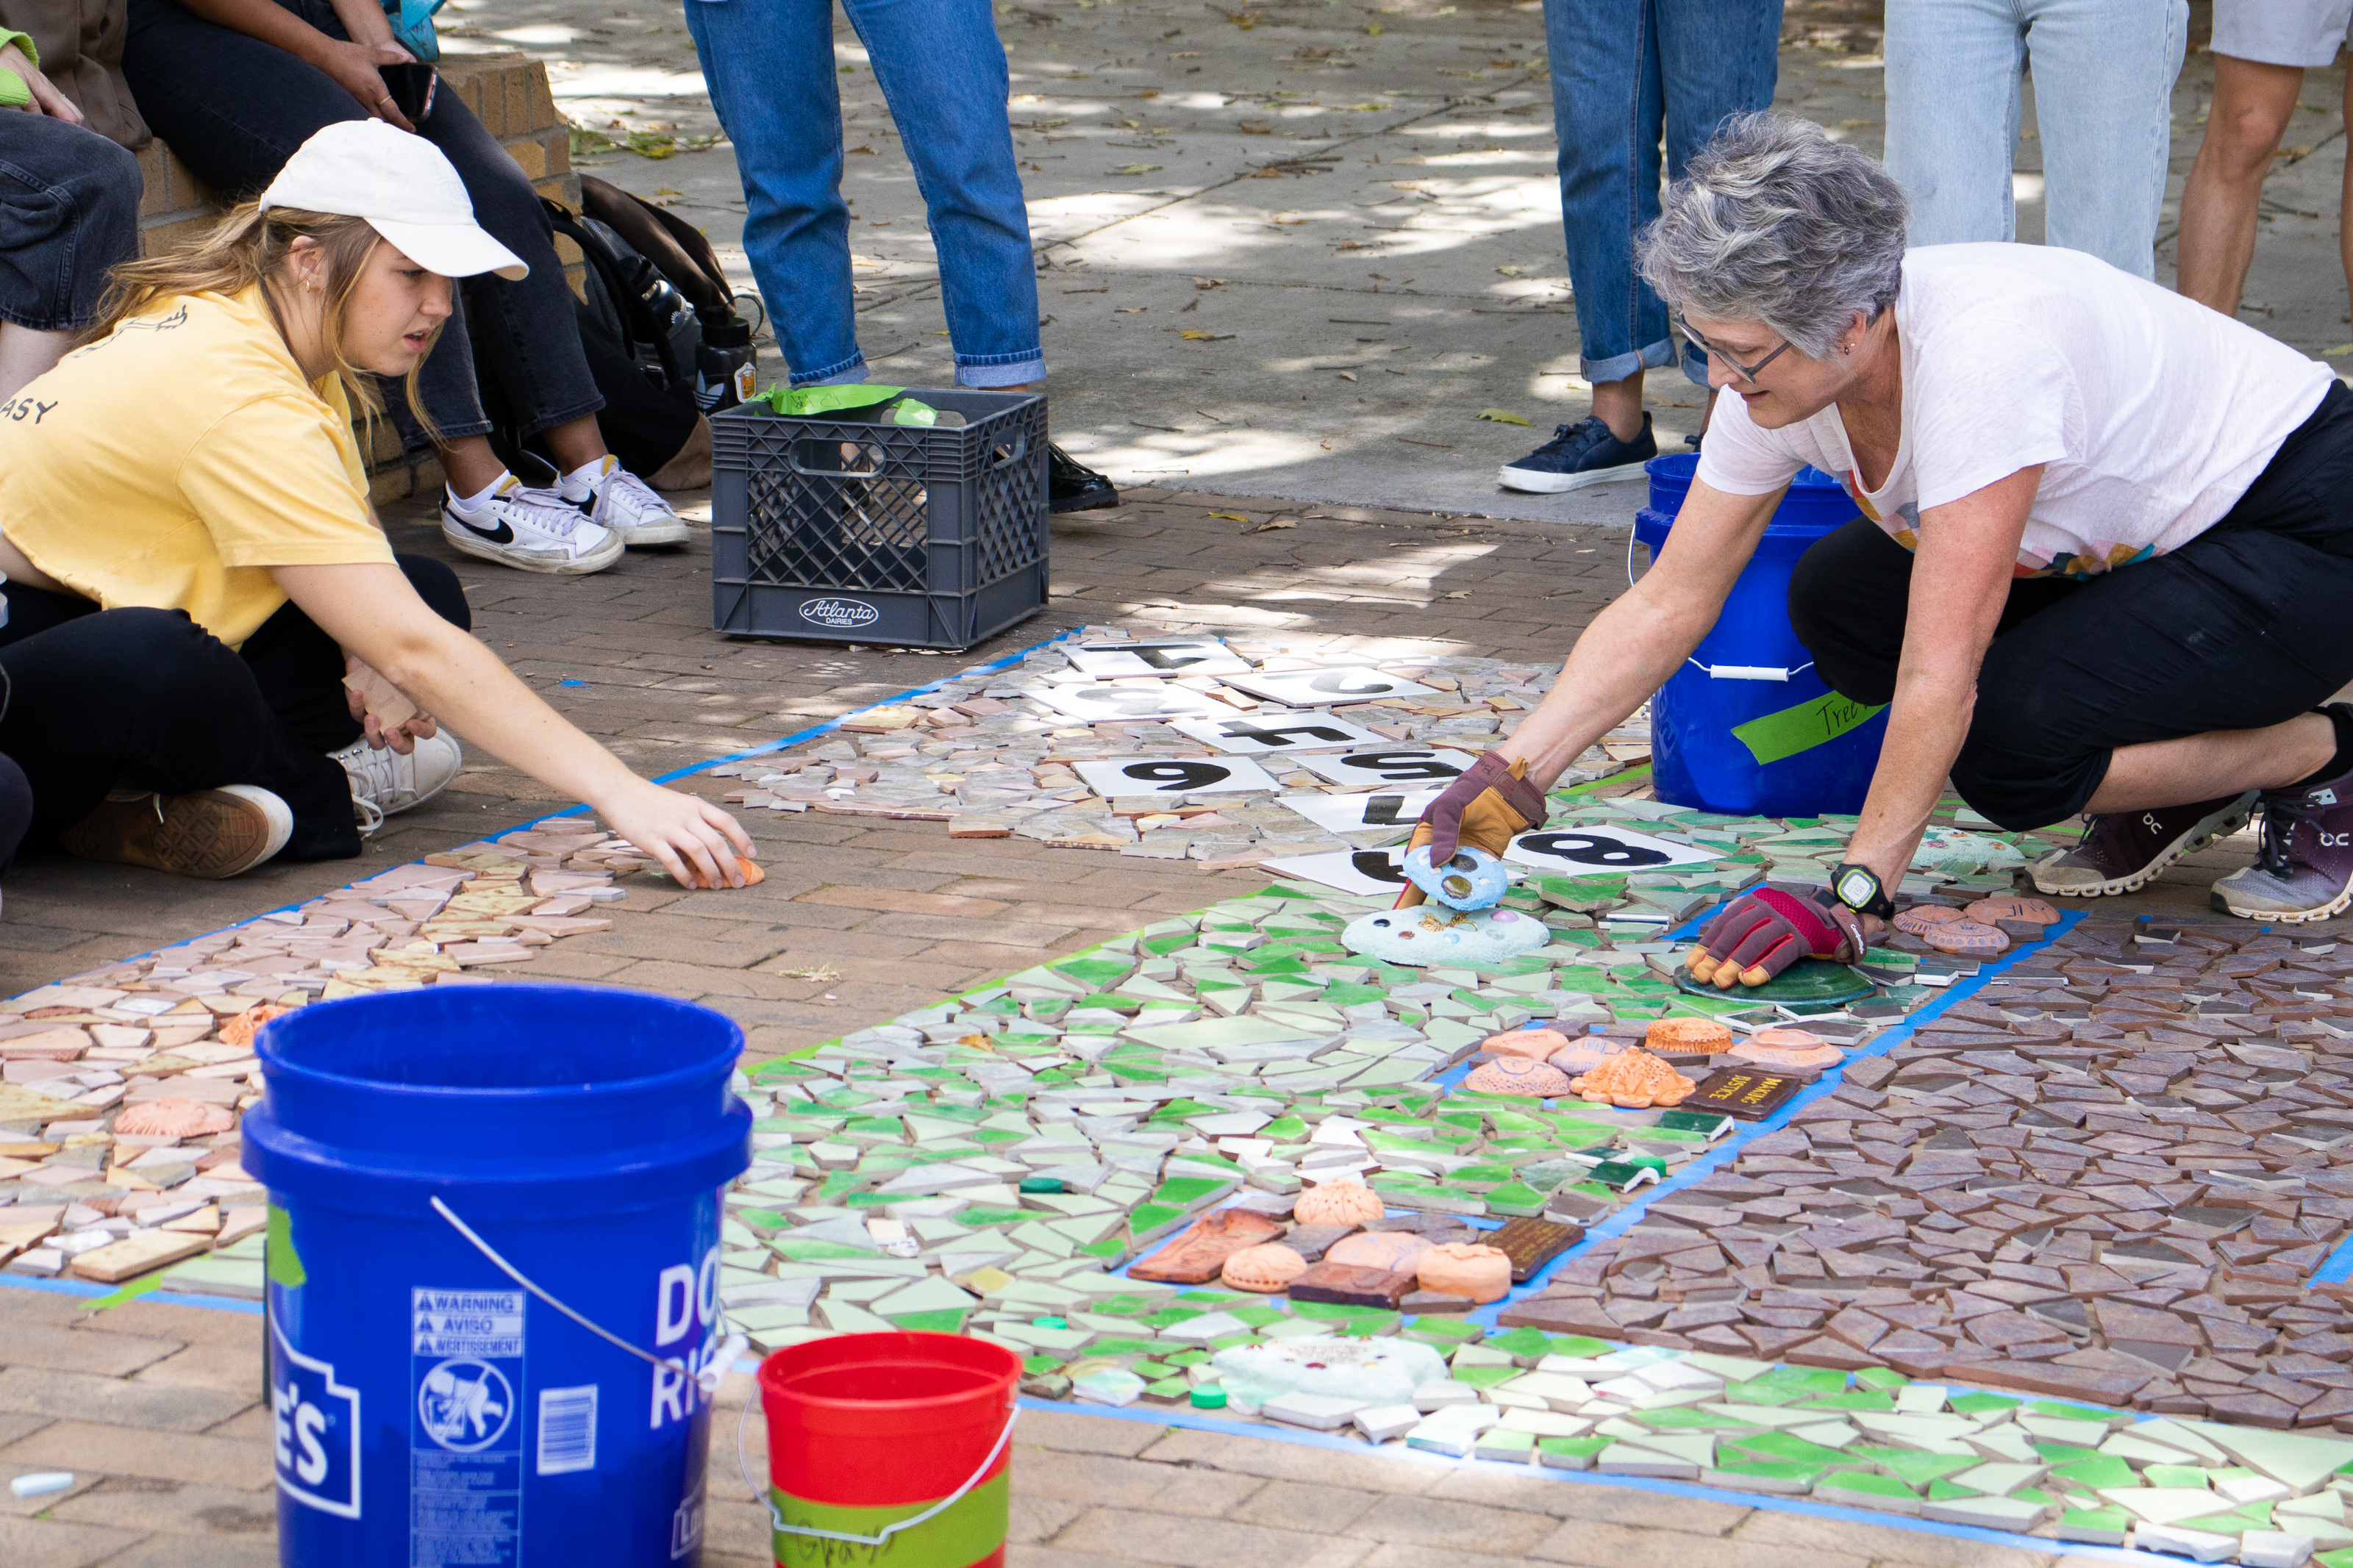 Lynn Sanders-Bustle assembling mosaic with students